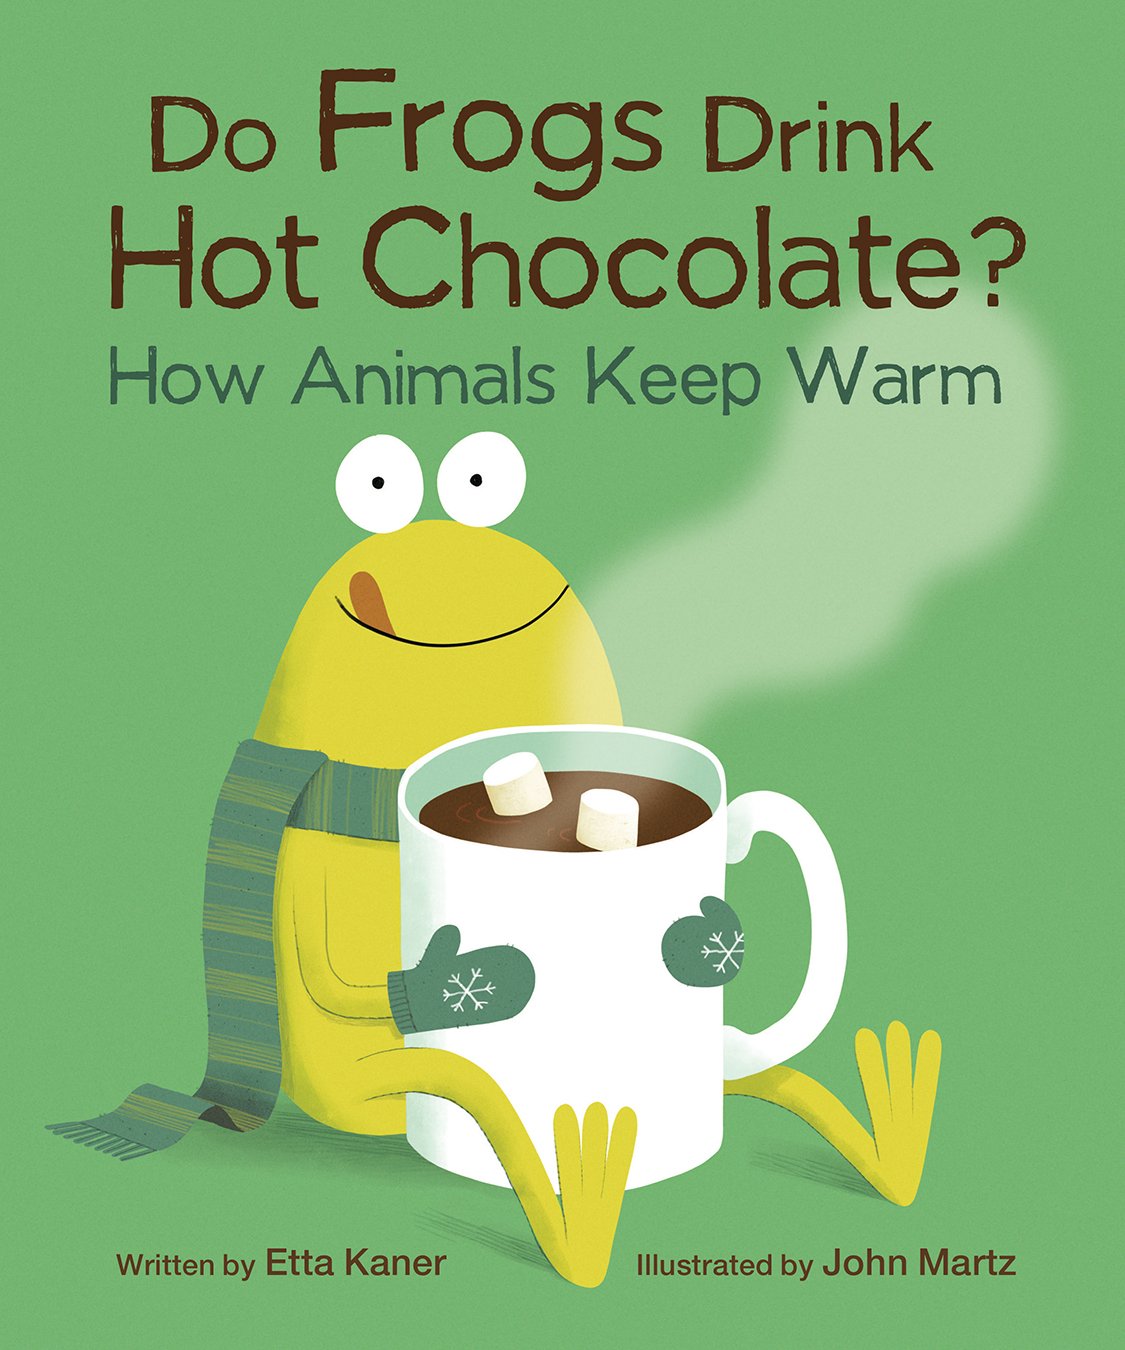 Do Frogs Drink Hot Chocolate? book cover